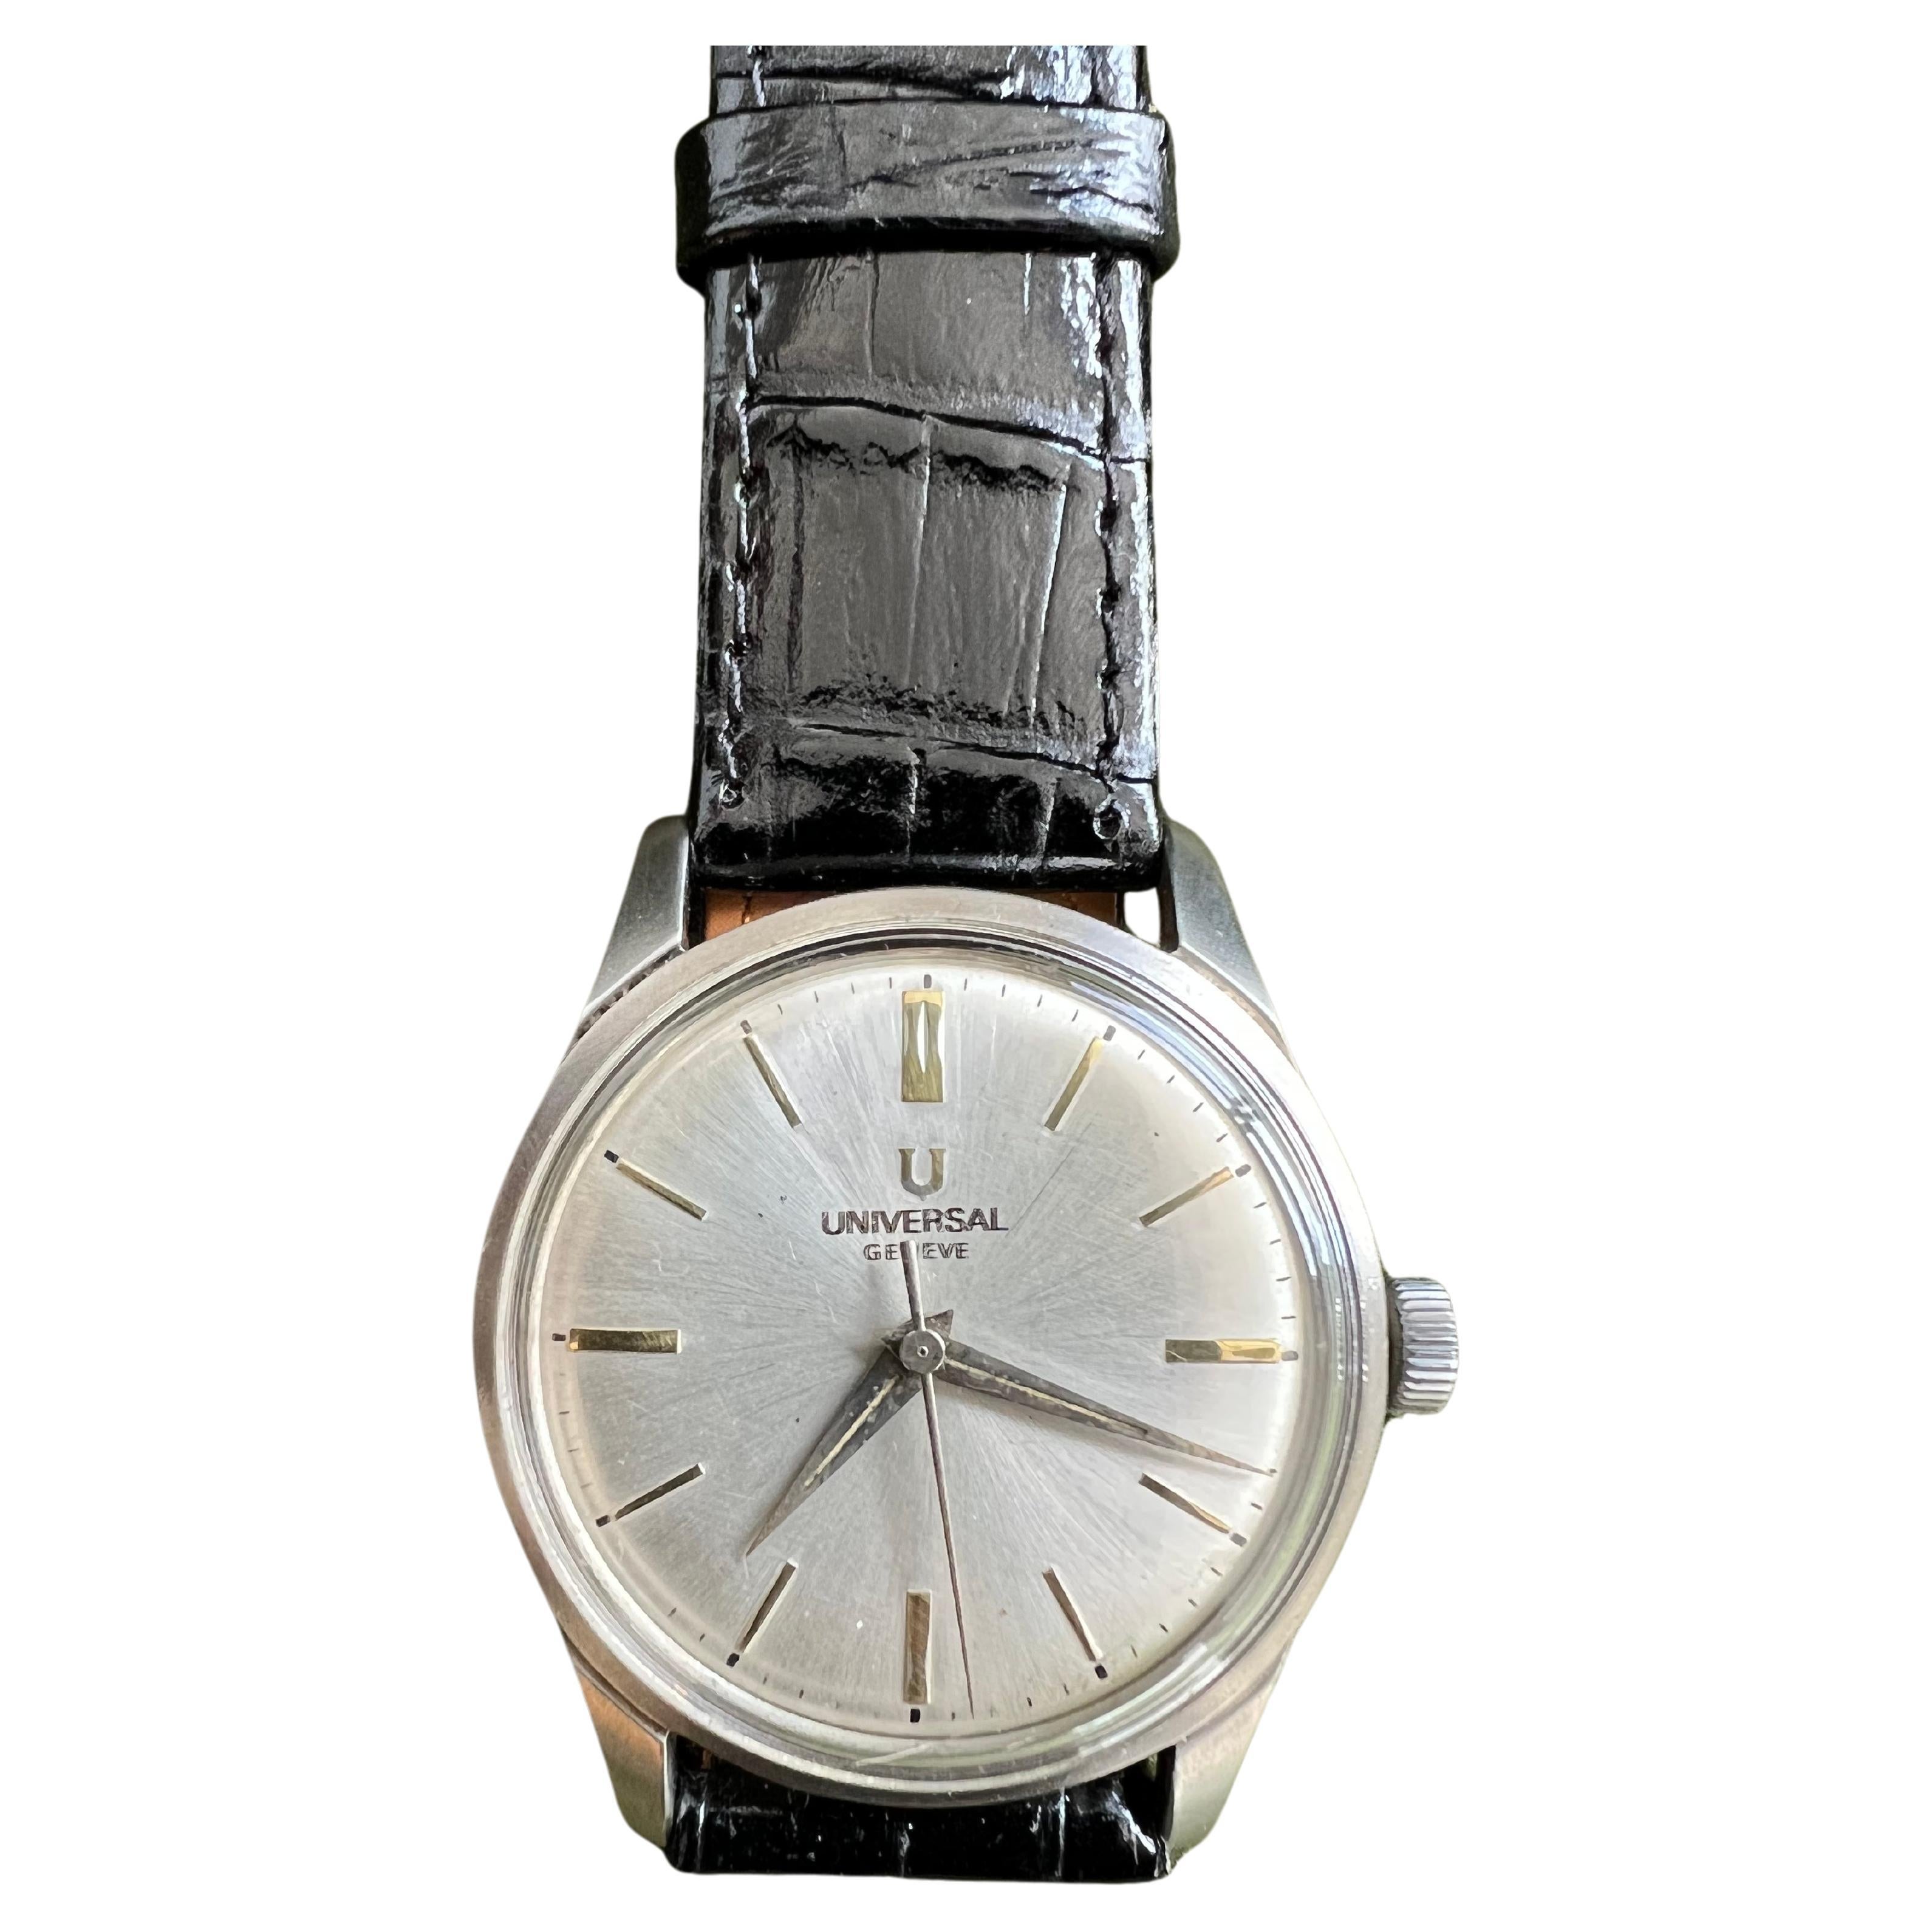 A pristine and classy dress watch from the early 60s.
White face and gold dials 
This watch features the classic proportions, both in size and slimness, that a dress watch should have. The dial is a silvery white colour, and has elongated batons at